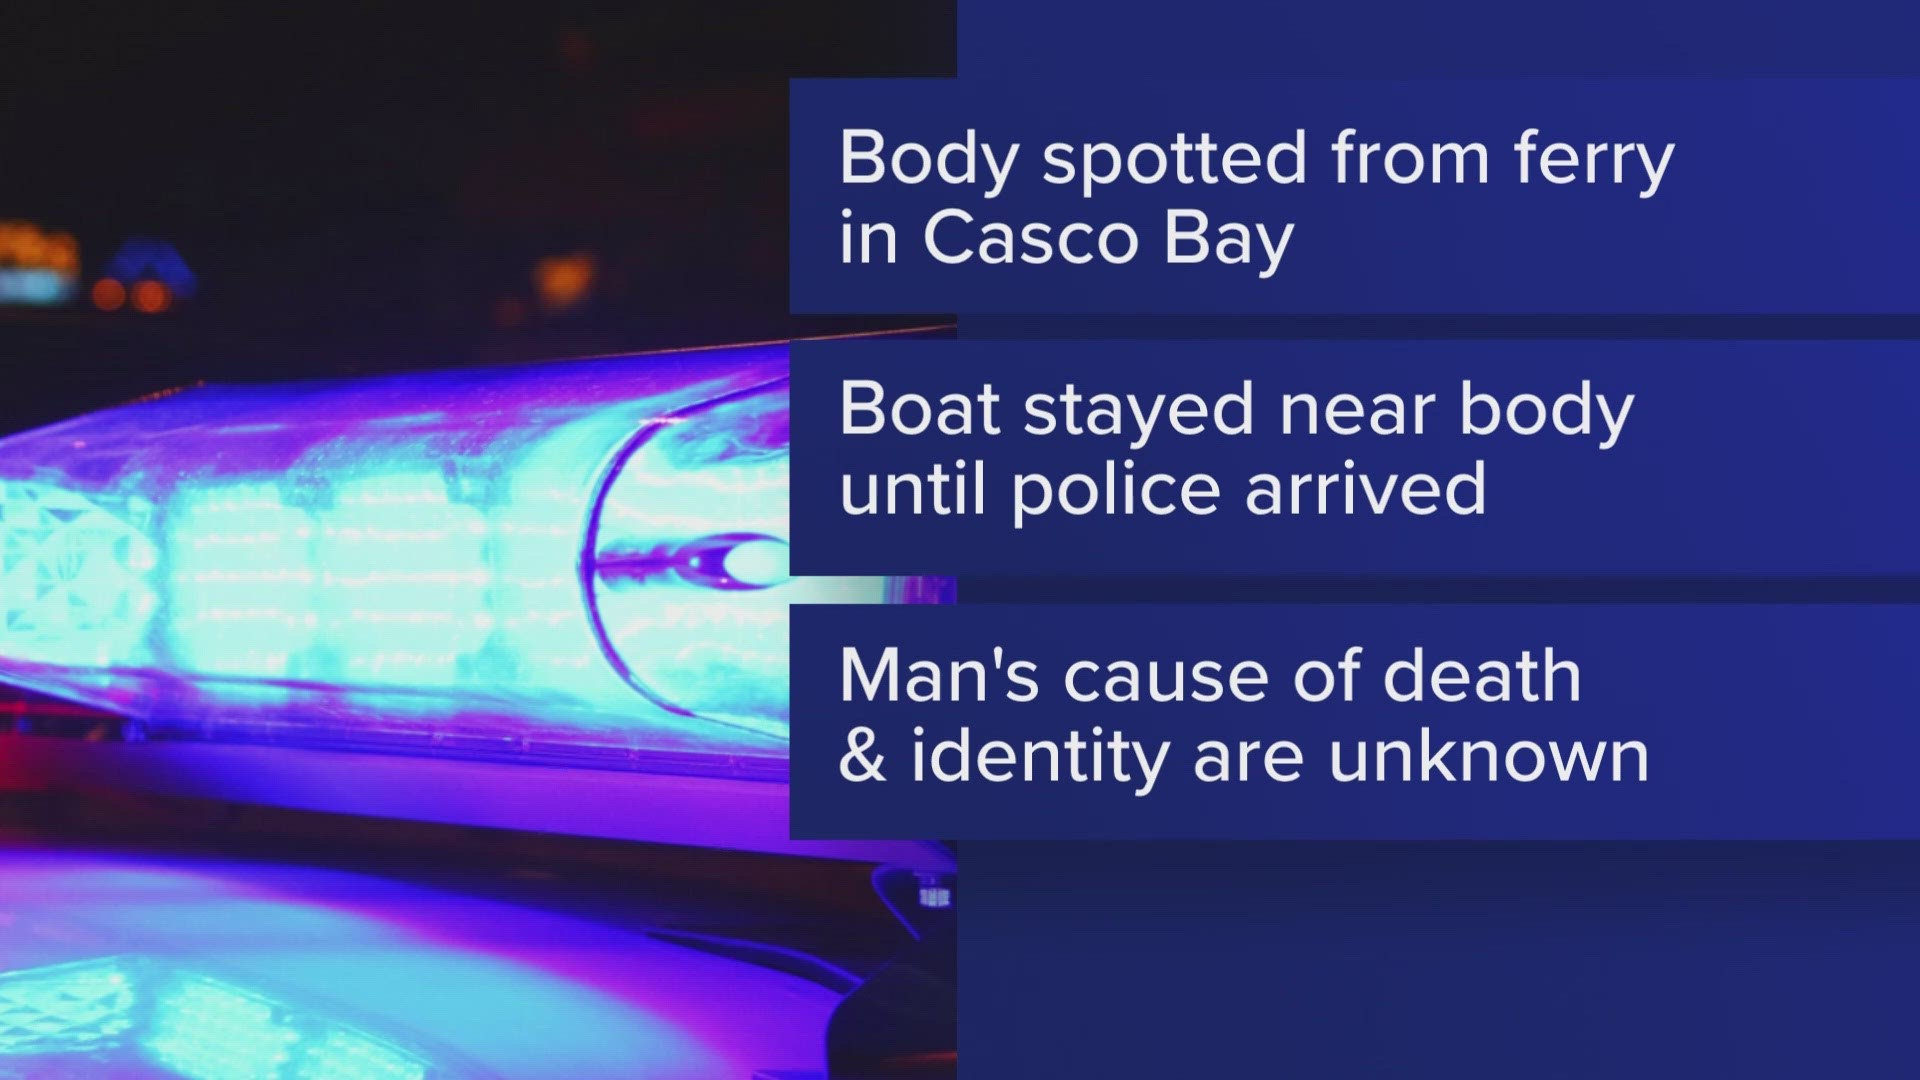 A man’s body was spotted floating in the bay Saturday morning by a woman on a Casco Bay Lines ferry, a report from the Portland Press Herald said.